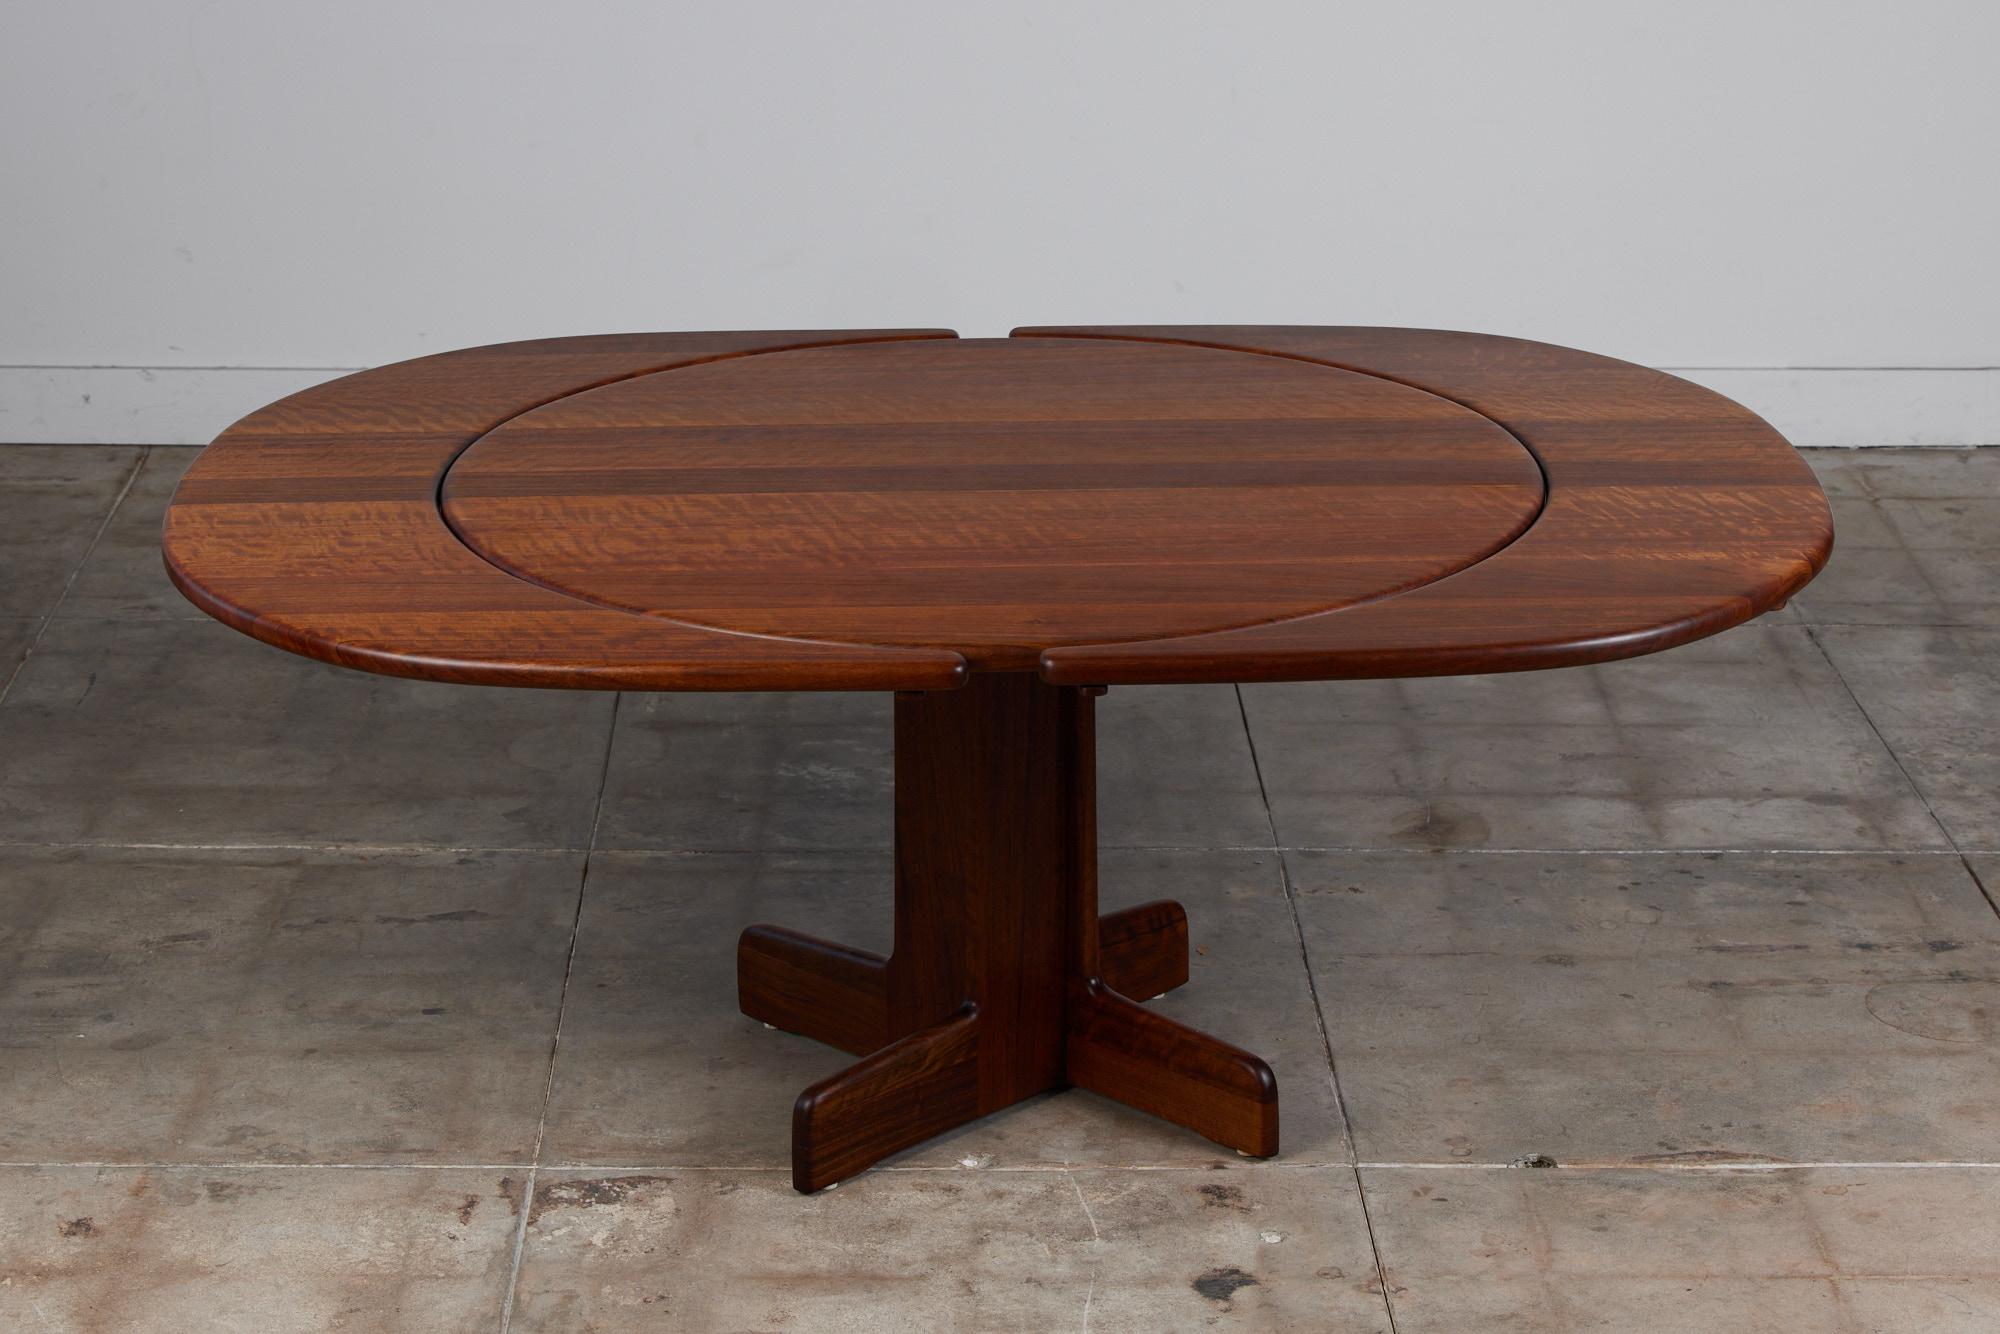 American made dining table, c.1970s, by Gerald McCabe. The table features a round top situated on a pedestal base made of solid Shedua. The table comes with two crescent leaves which attach to the outers sides of the table expanding to seat six